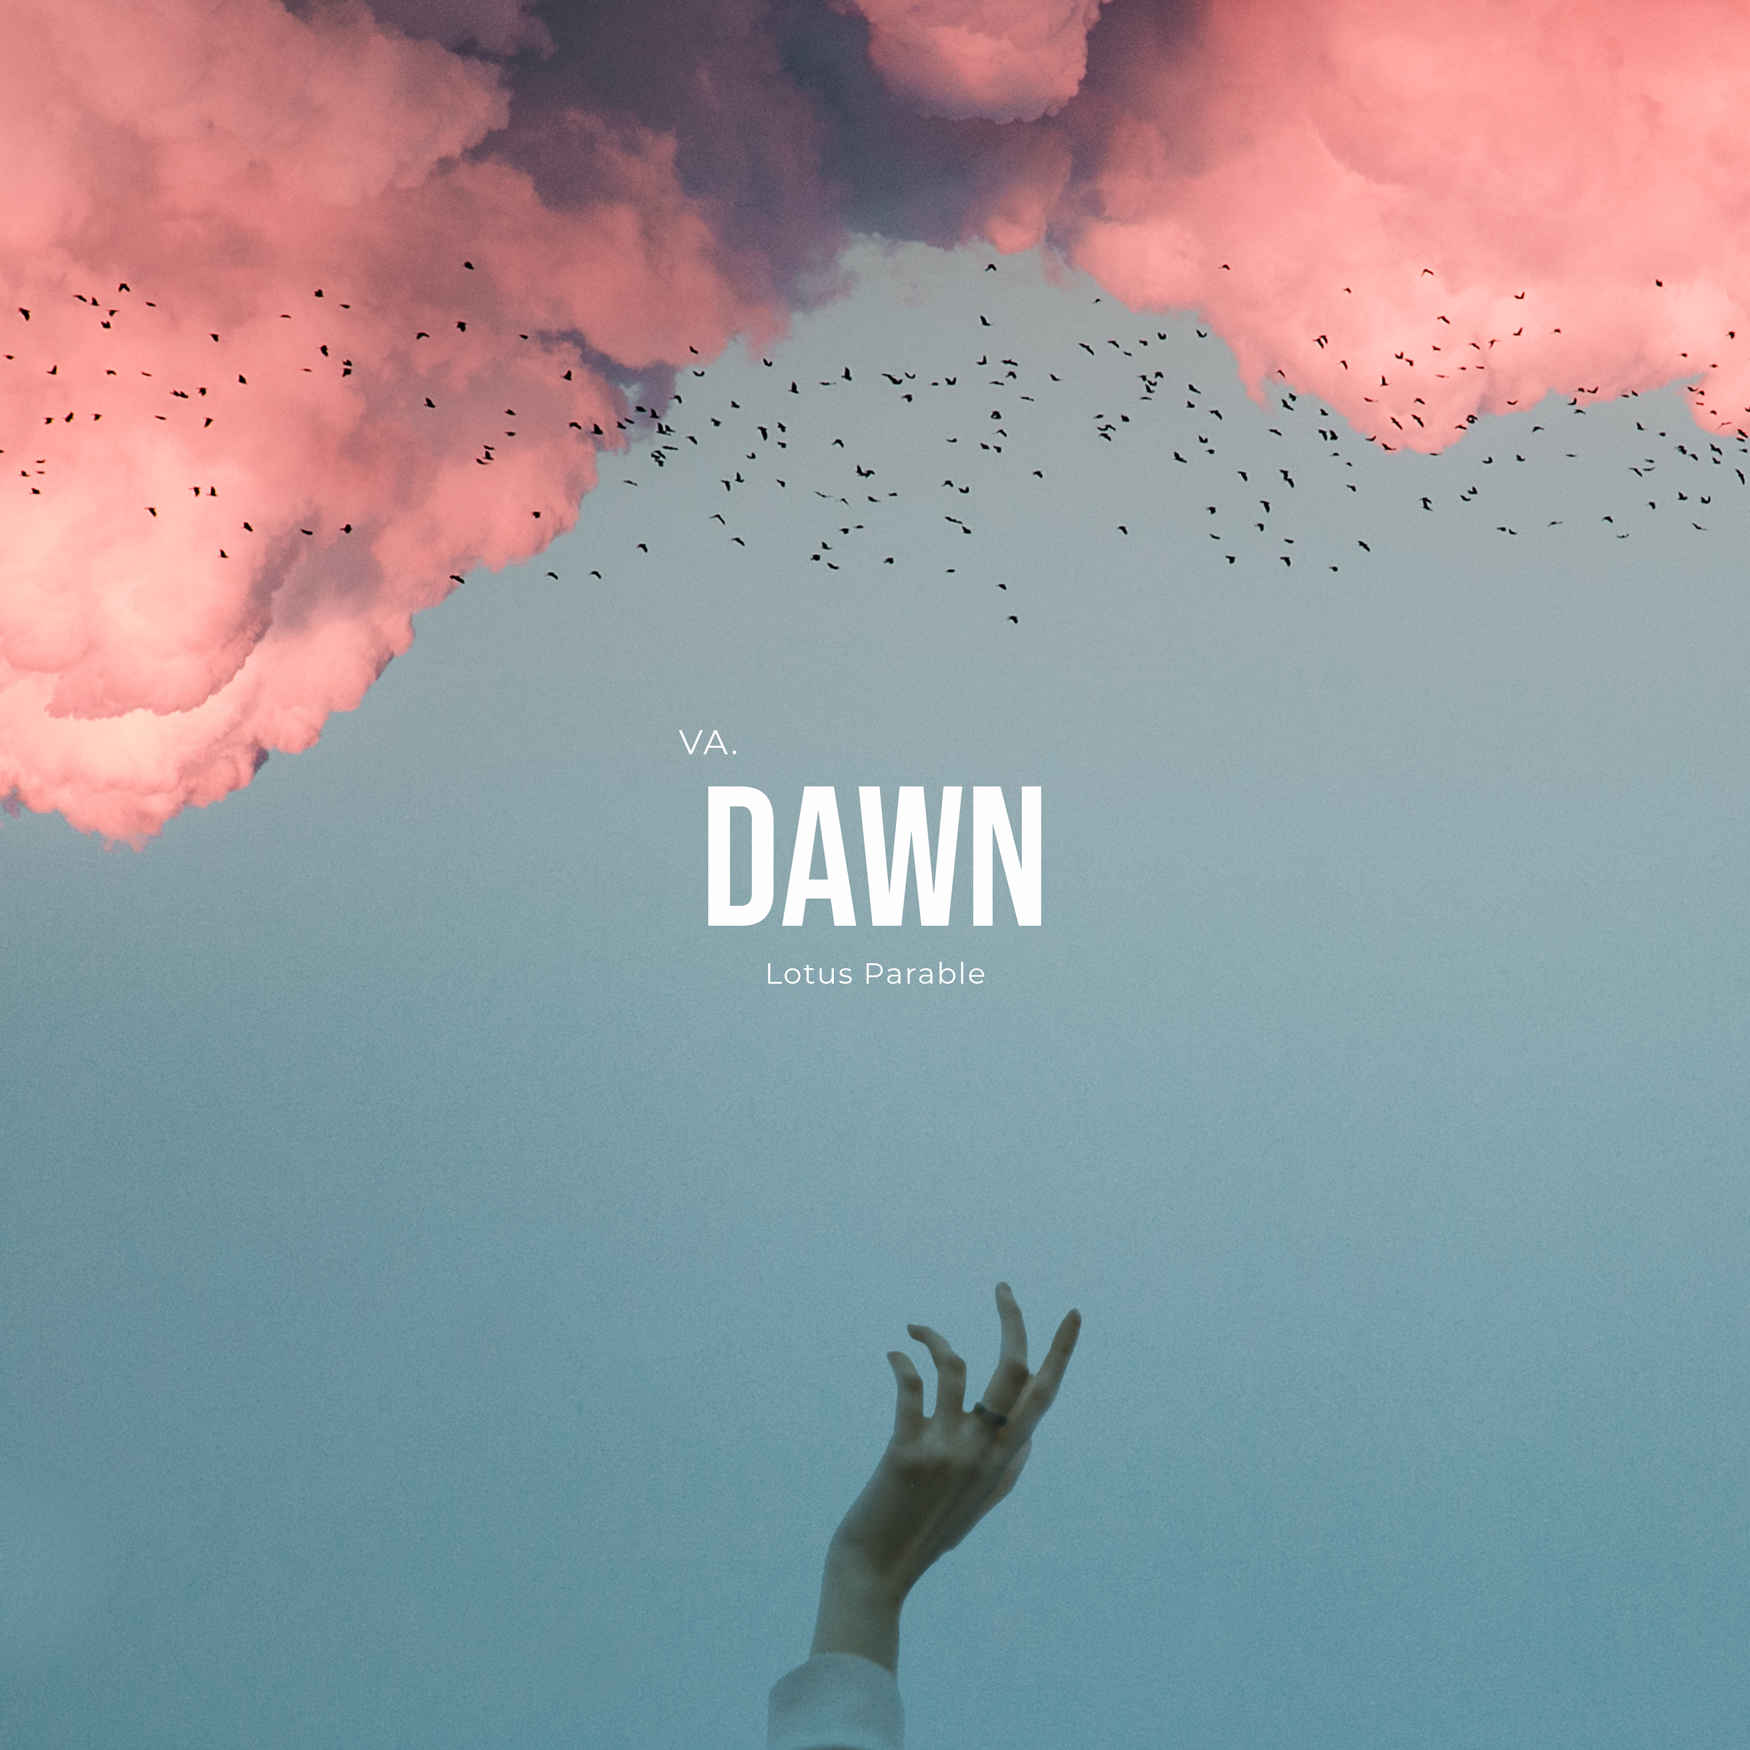 VA. Dawn released by Lotus Parable